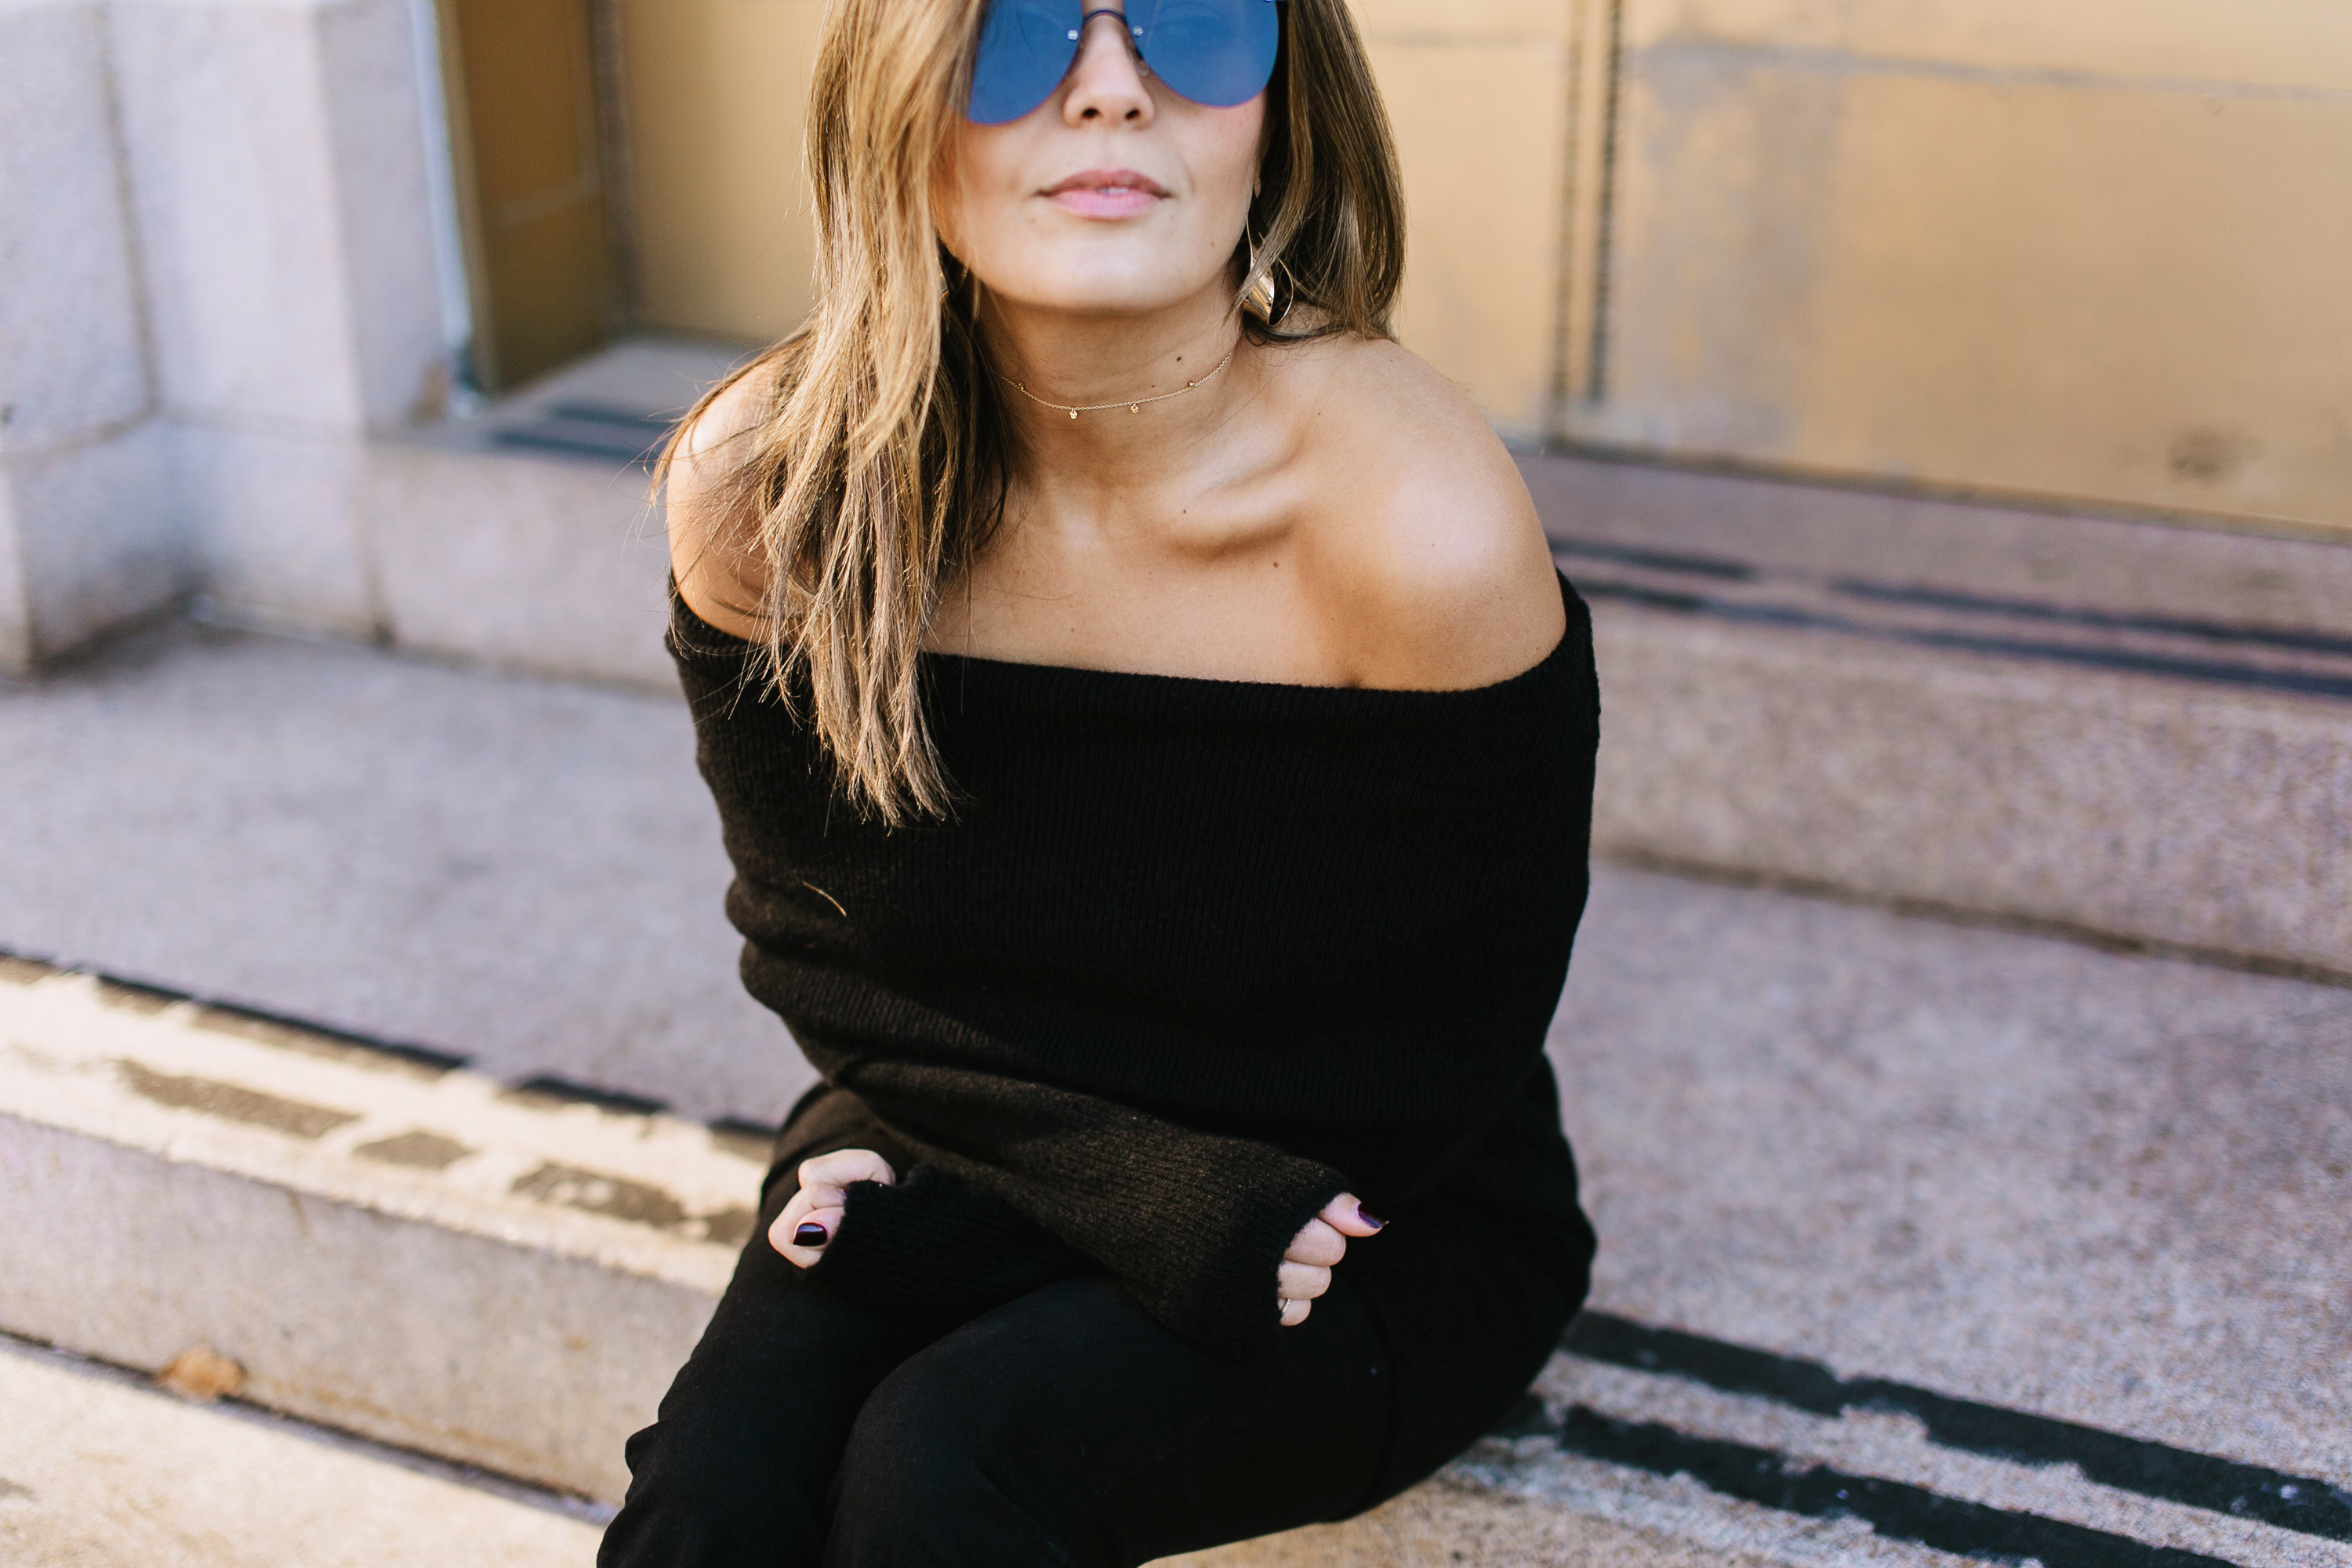 Blogger Sara Azani of Style MBA wears Alexander Wang Elise studded suede heels, KENDALL + KYLIE Fuzzy Knit Tunic, Gorjana 5 Disc Choker Necklace, Le Specs "The Prince" Sunglasses.